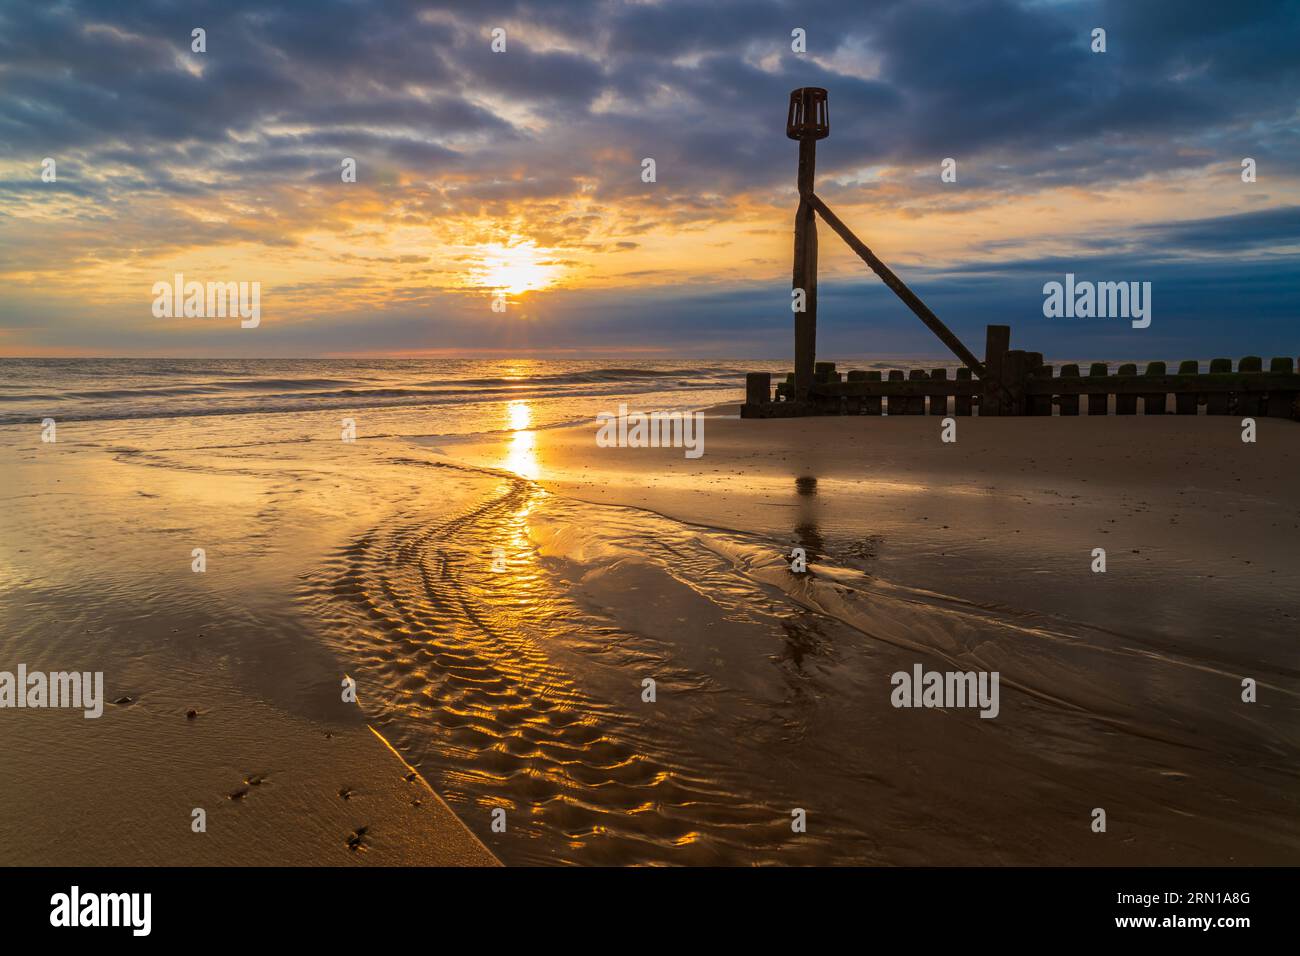 A landscape image of the sunrise on the beach in Mundesley, North Norfolk, UK Stock Photo